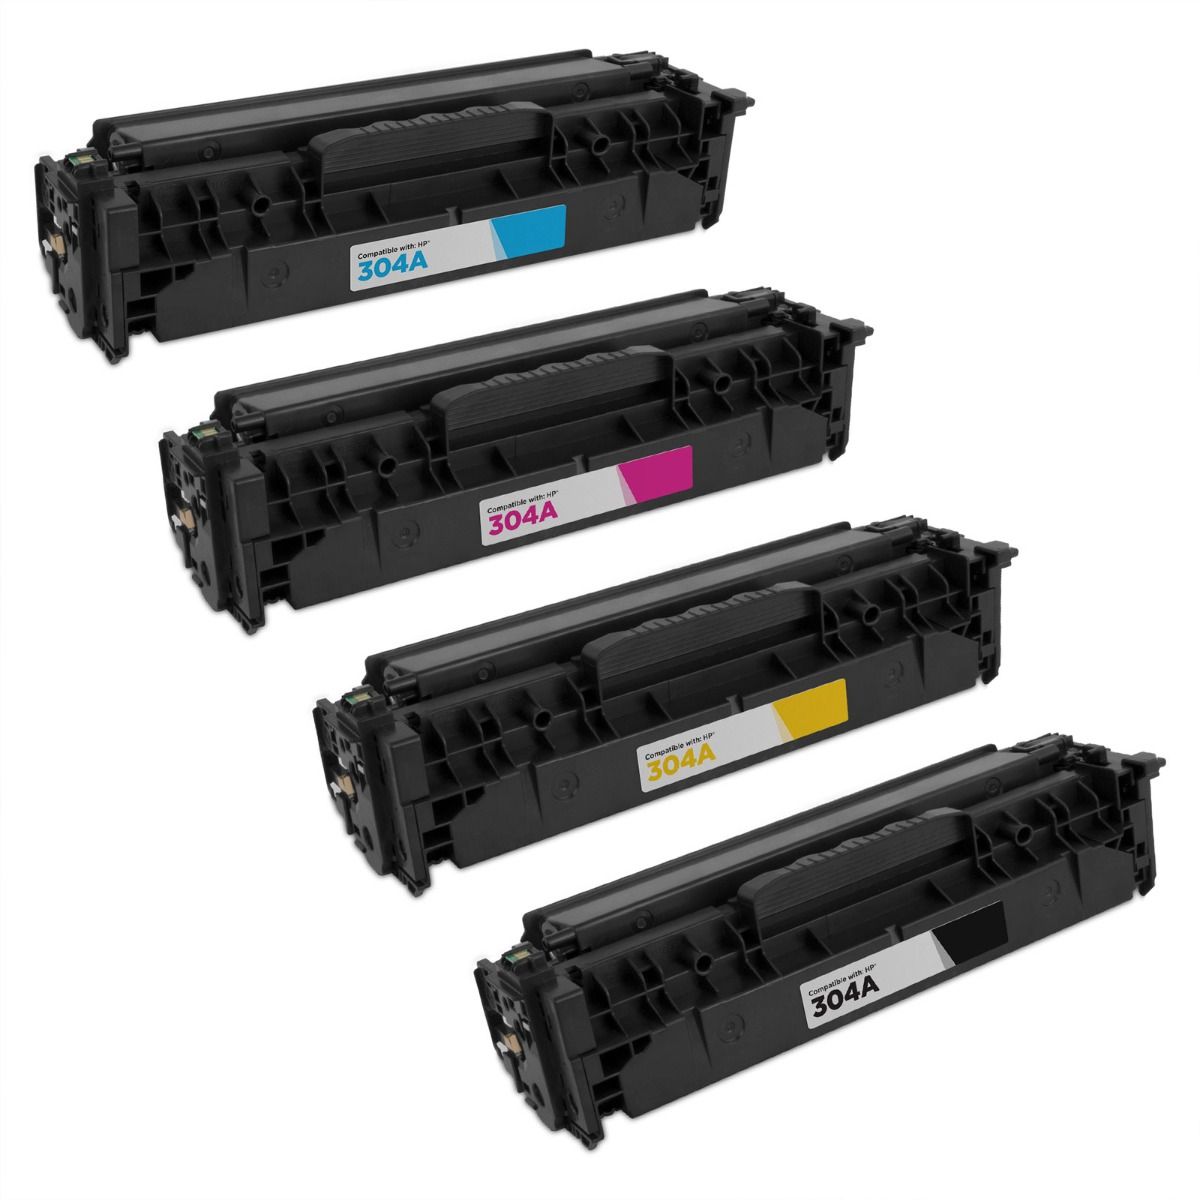 IMPERIAL BRAND Compatible toner cartridge for HP 304A MULTI-PACK BK,C,M,Y TONER 3500 PAGES